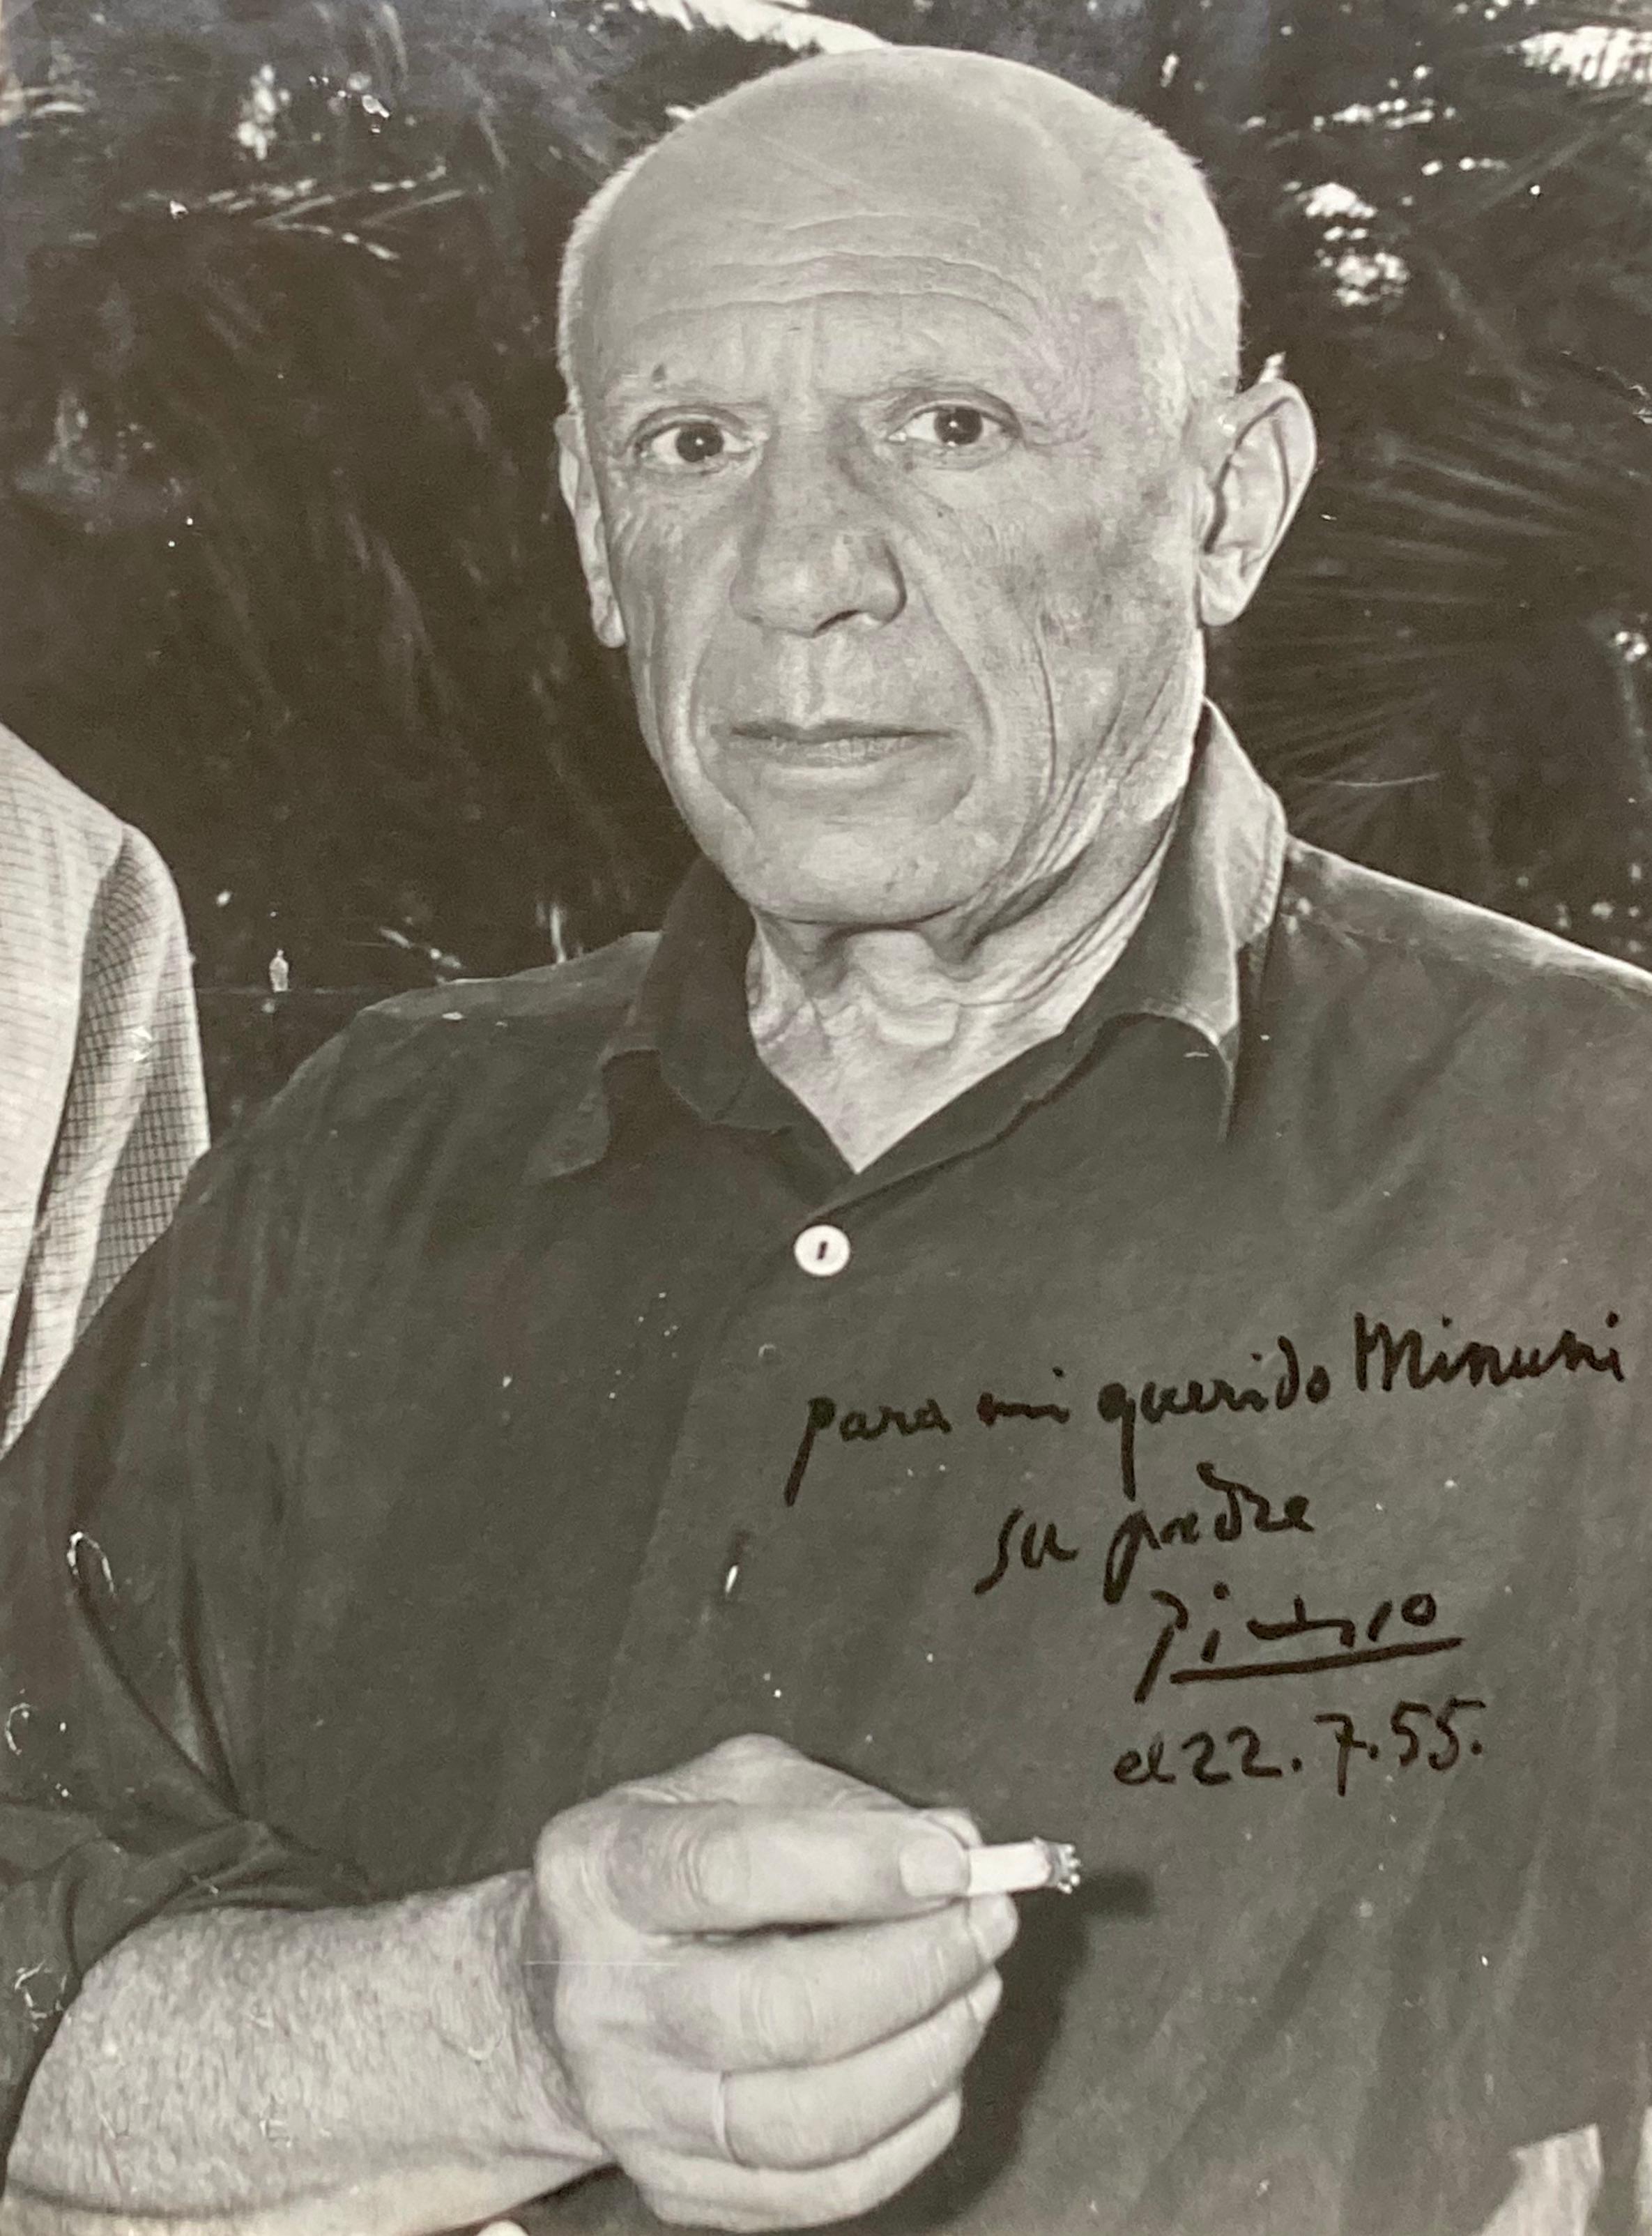 Portrait of Pablo Picasso  
Signed by Pablo Picasso and decicated “Para mi querido Minuni, su padre. Picasso el 22.7.55 to his friend the bullfighter “El Minuni”

Francisco Reina, 'El Minuni', was born in Tomares, near Seville, in 1910. Although he